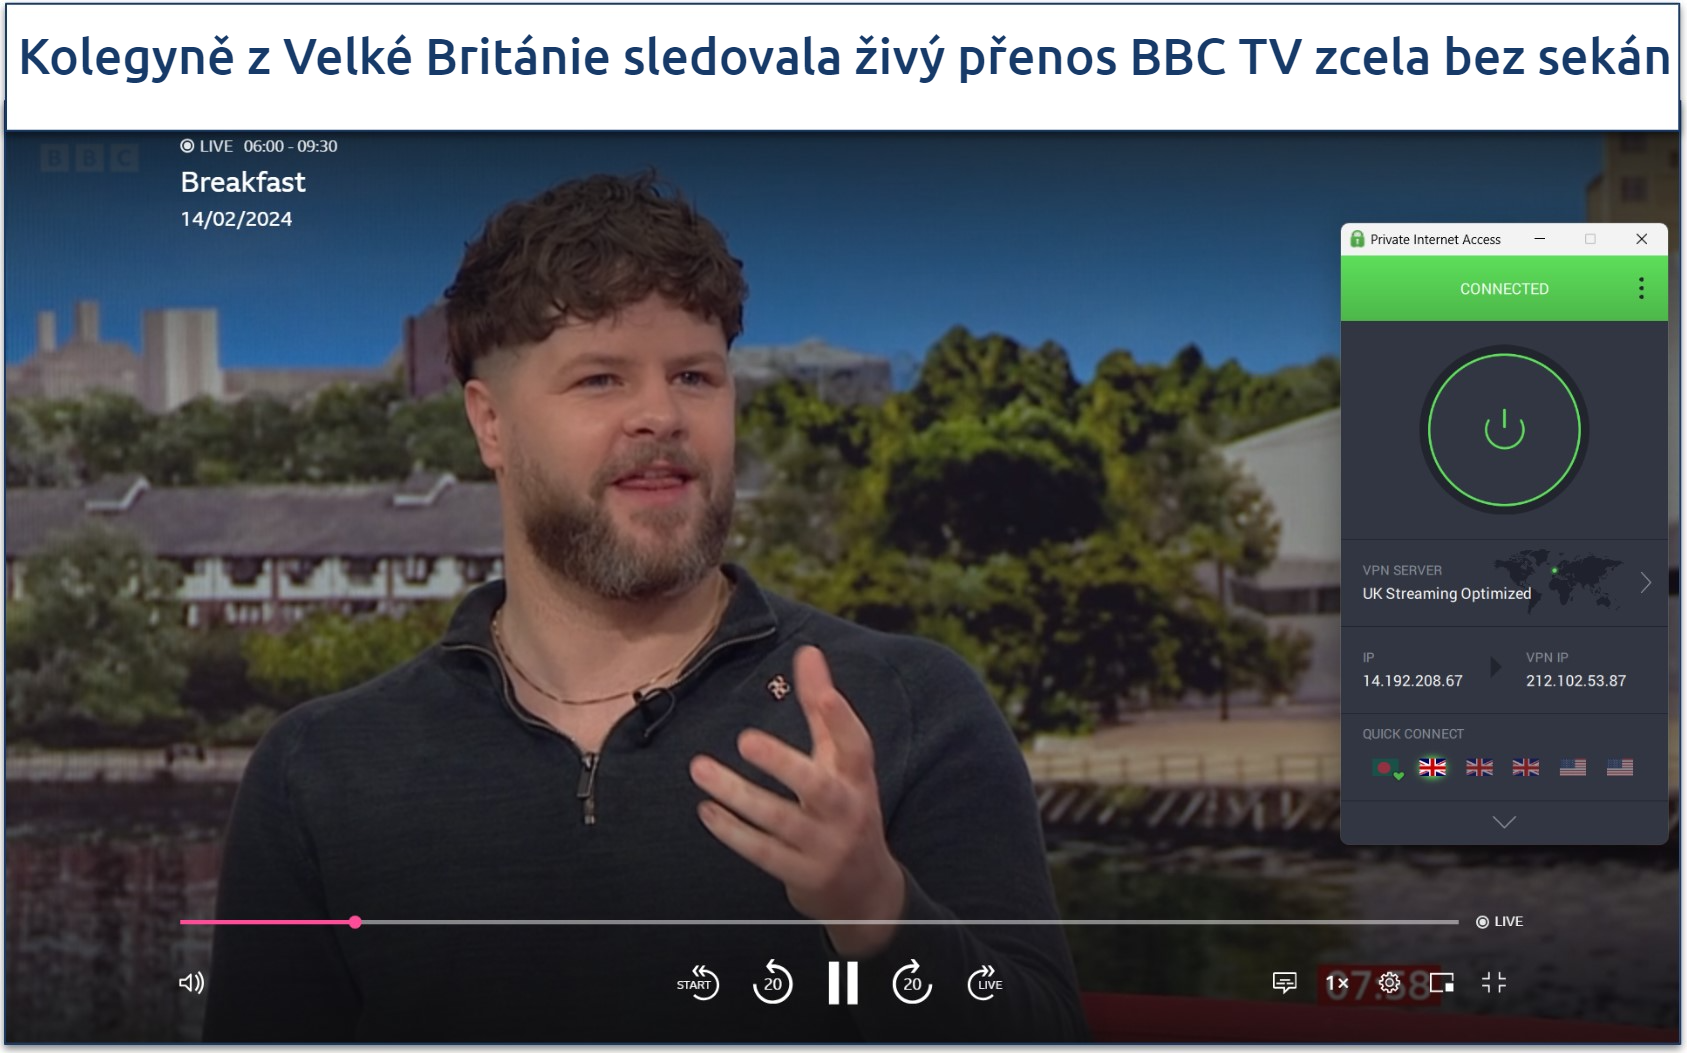 A screenshot of streaming the Breakfast show live on BBC iPlayer while connected to PIA's UK-optimized server.